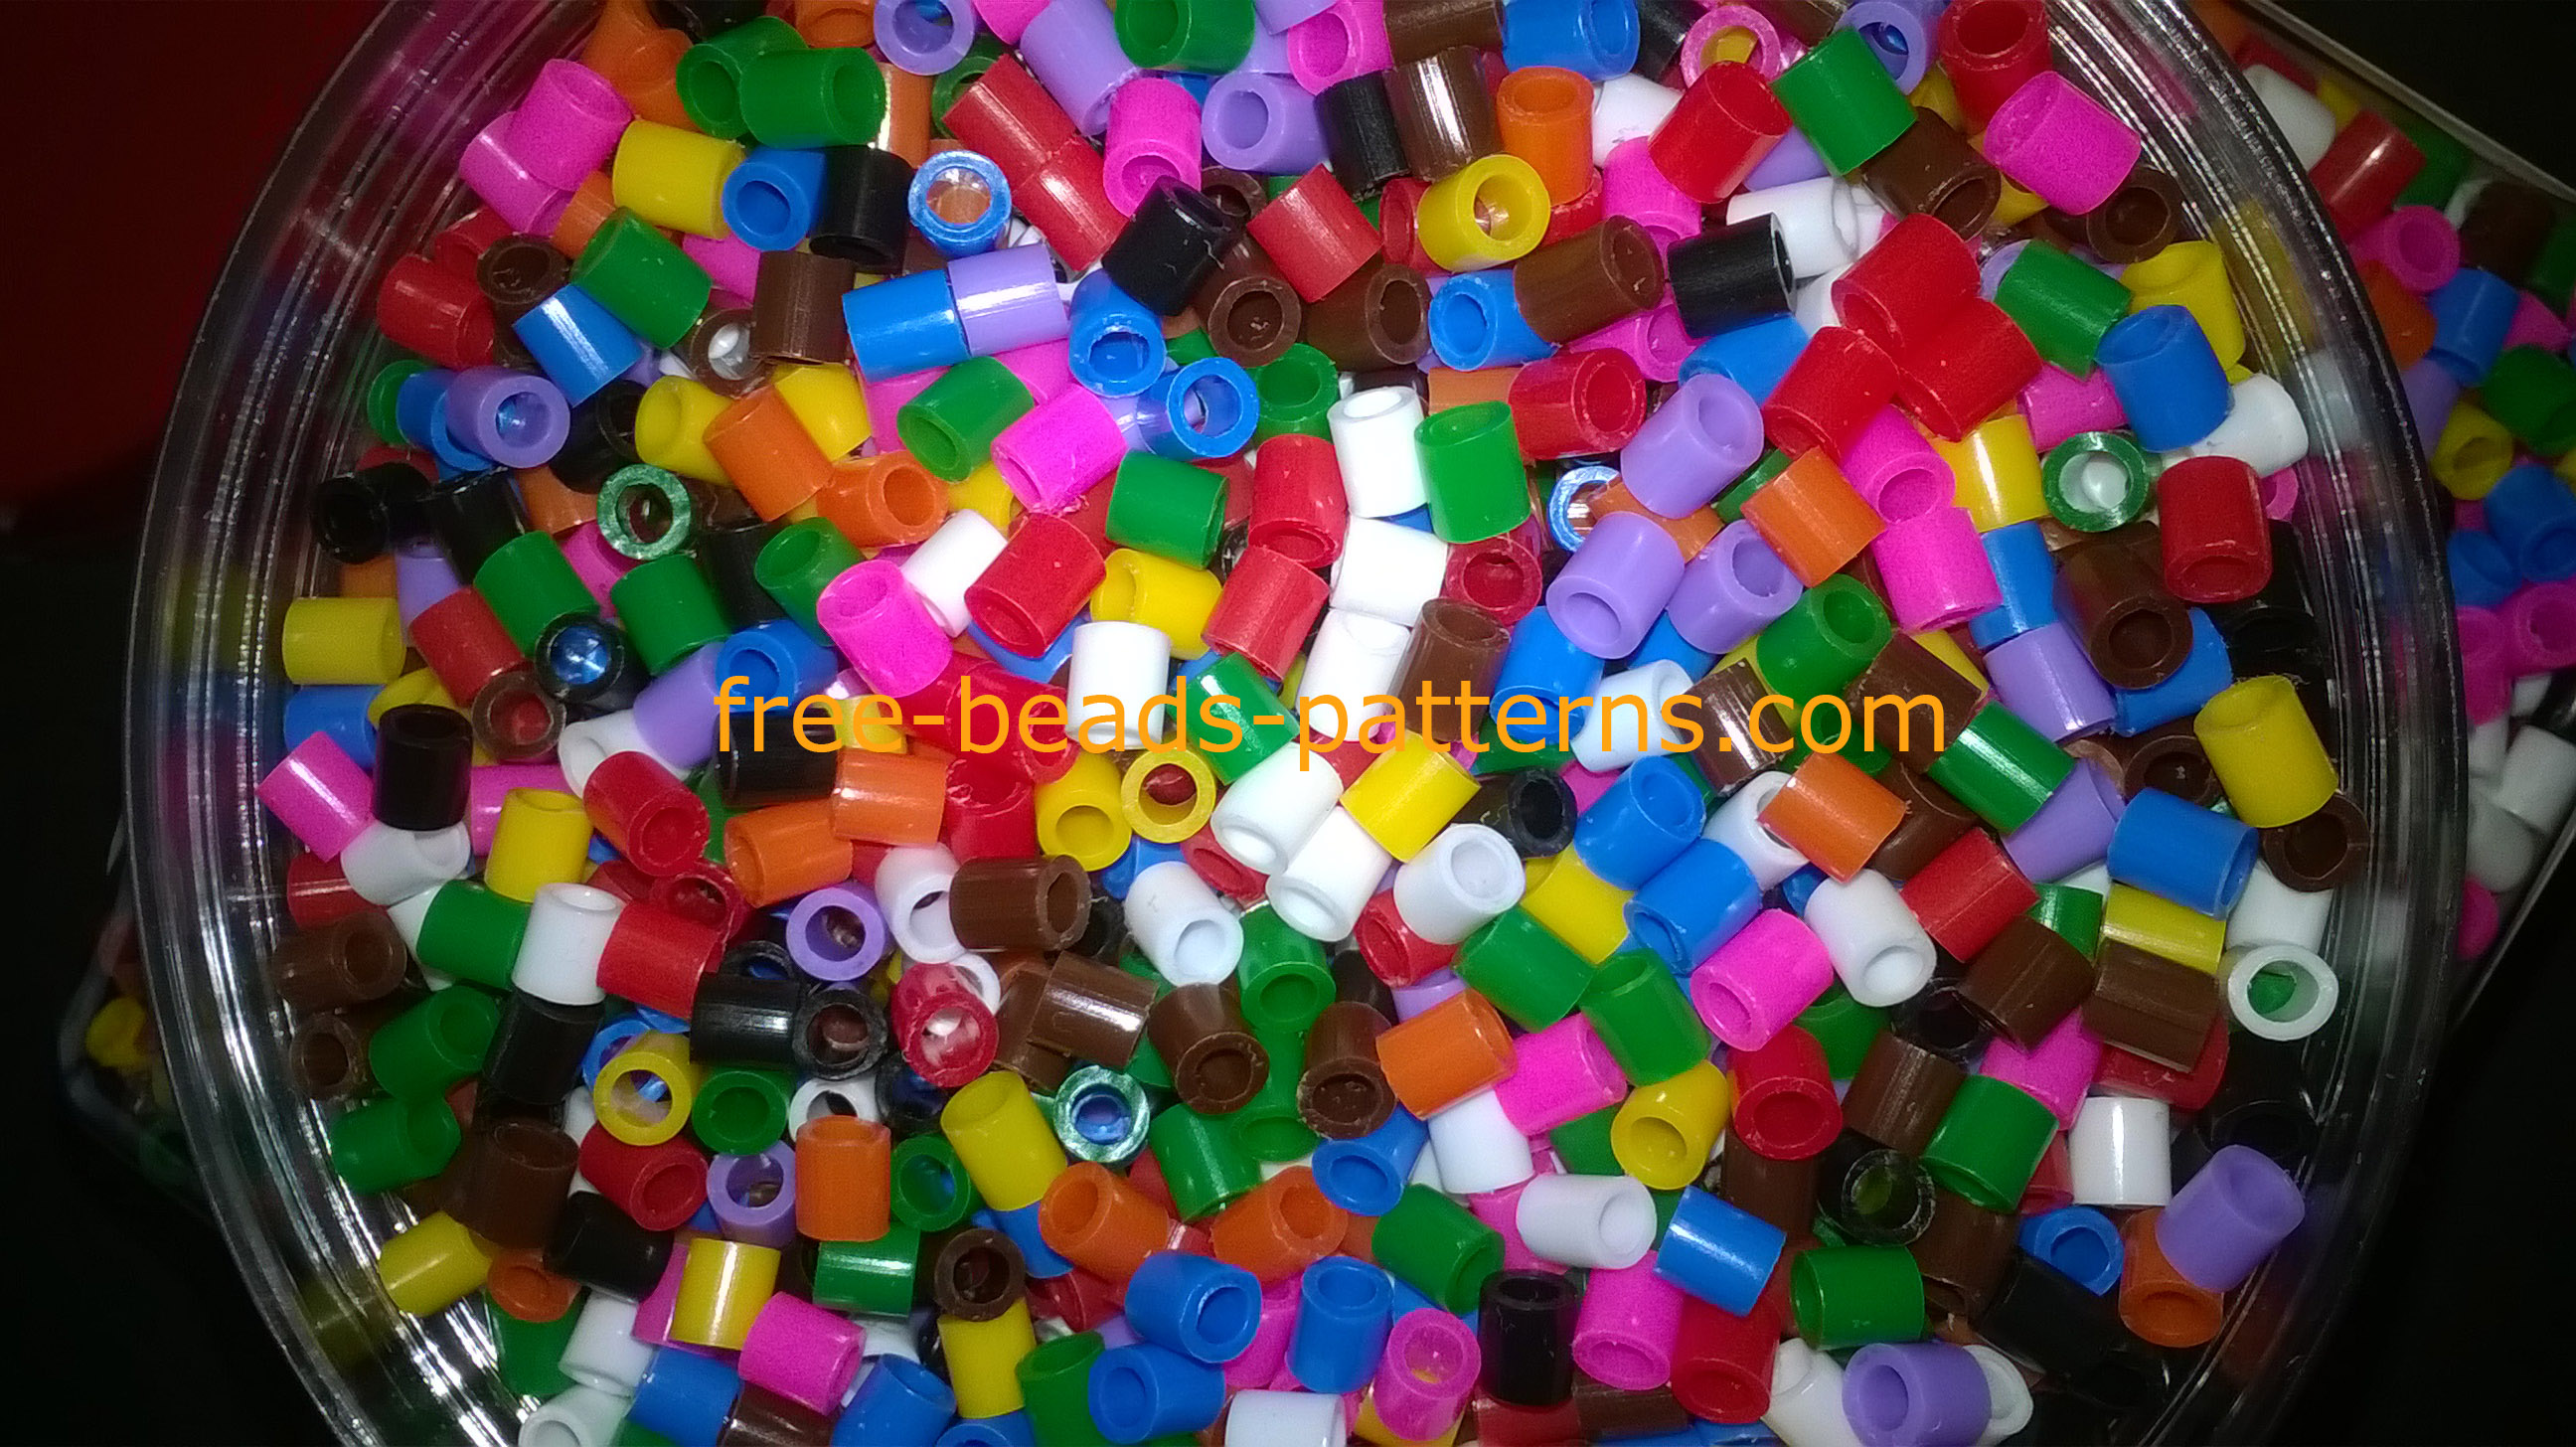 Ikea Pyssla beads for children over 4 years old 5 mm perler beads photos (6)